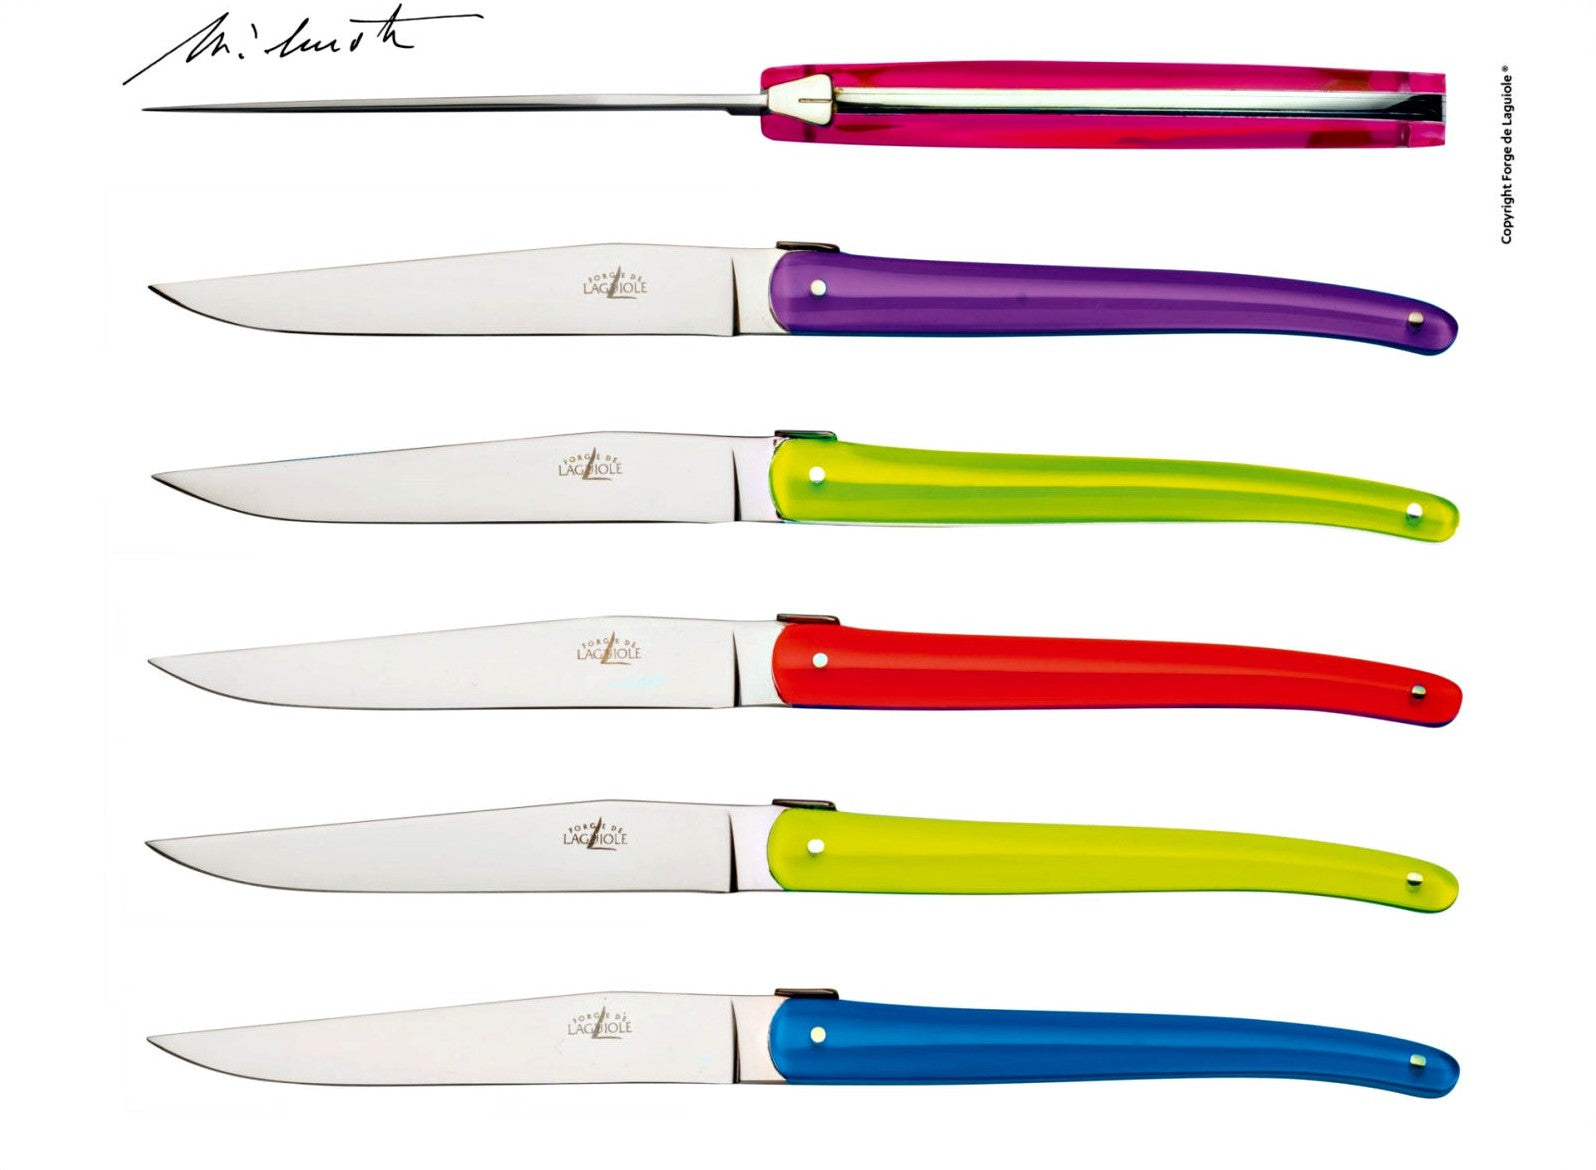 Jean-Michel Wilmotte Neon Handle Table Knives (set of 6)